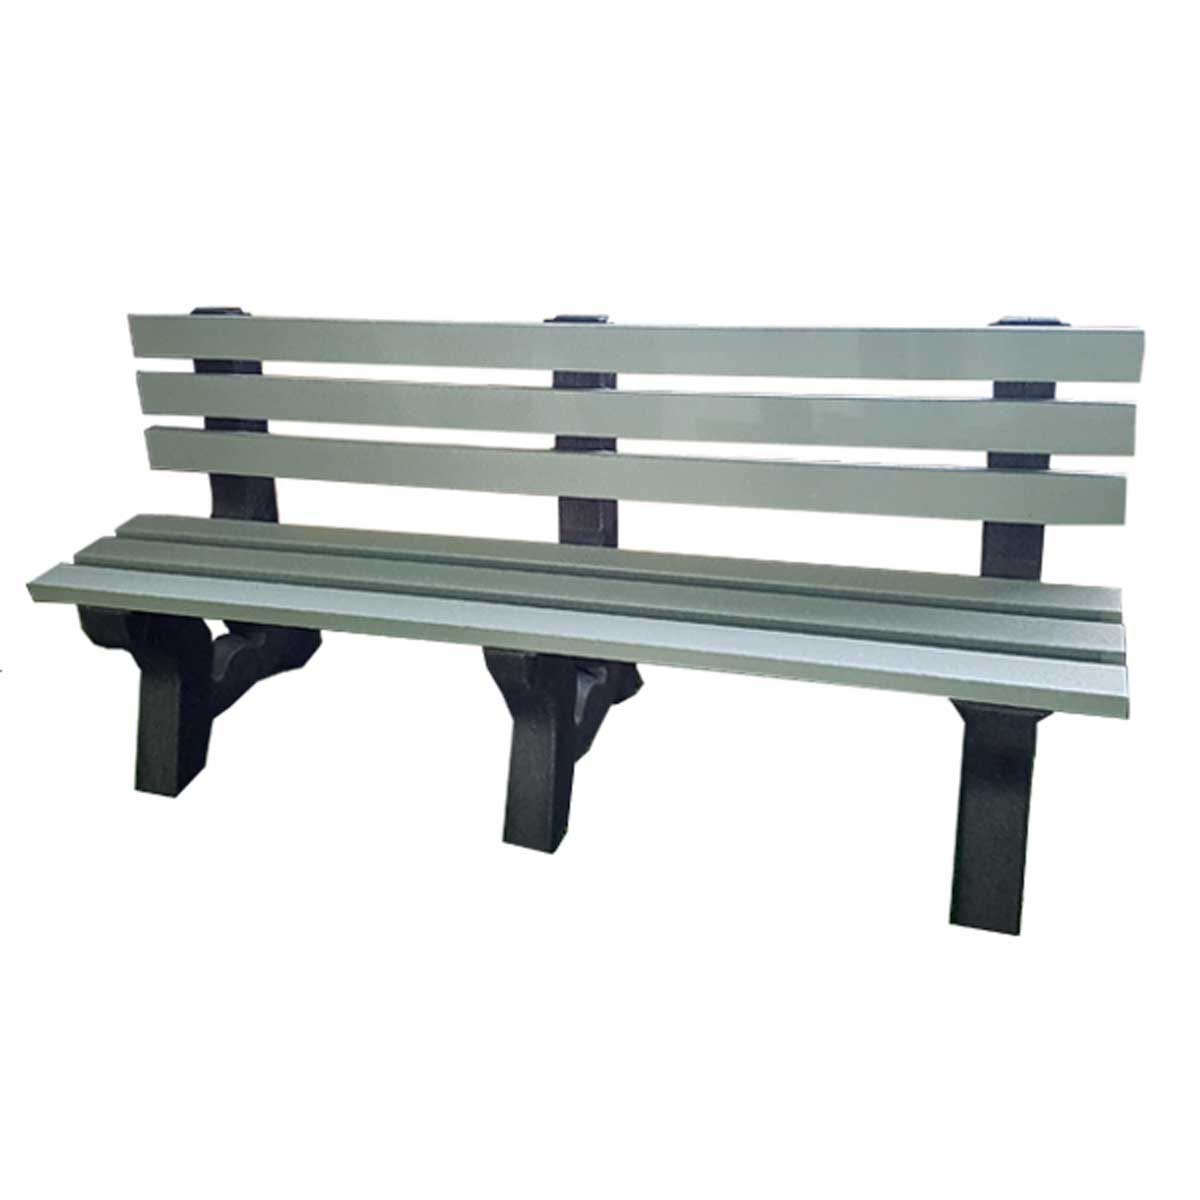 NBB Recycled Furniture NBB Recycled Plastic 3-4 Person Park Seat With Back - Grey